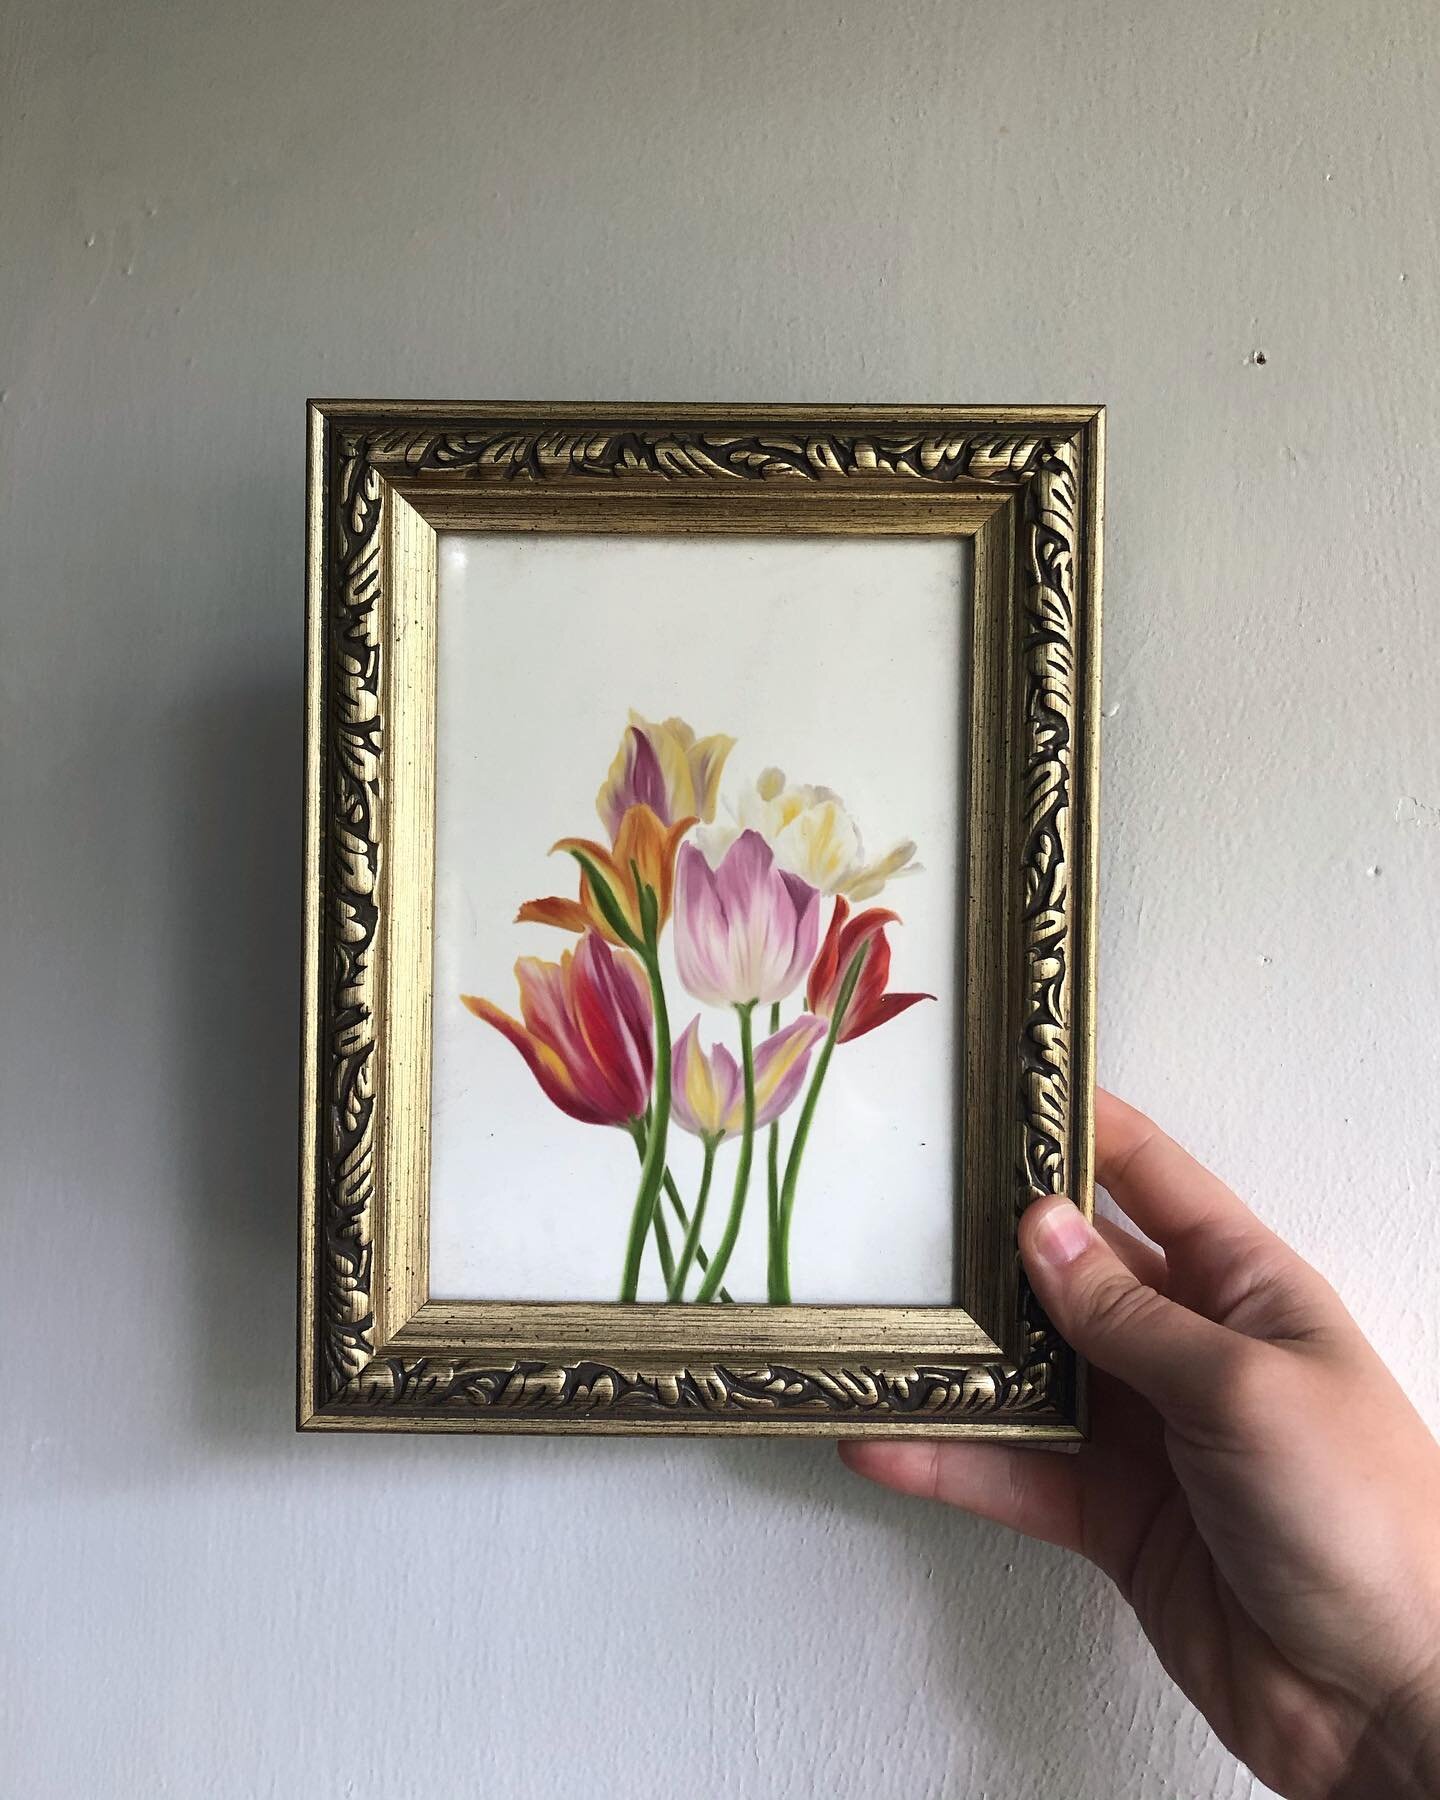 So obsessed with this! 😍

@shoptotallytaylored got this print from me at the Farmers Market on Saturday and popped it in this gorgeous frame to give as a gift! These flowers really bloom with a gold frame! ❤️